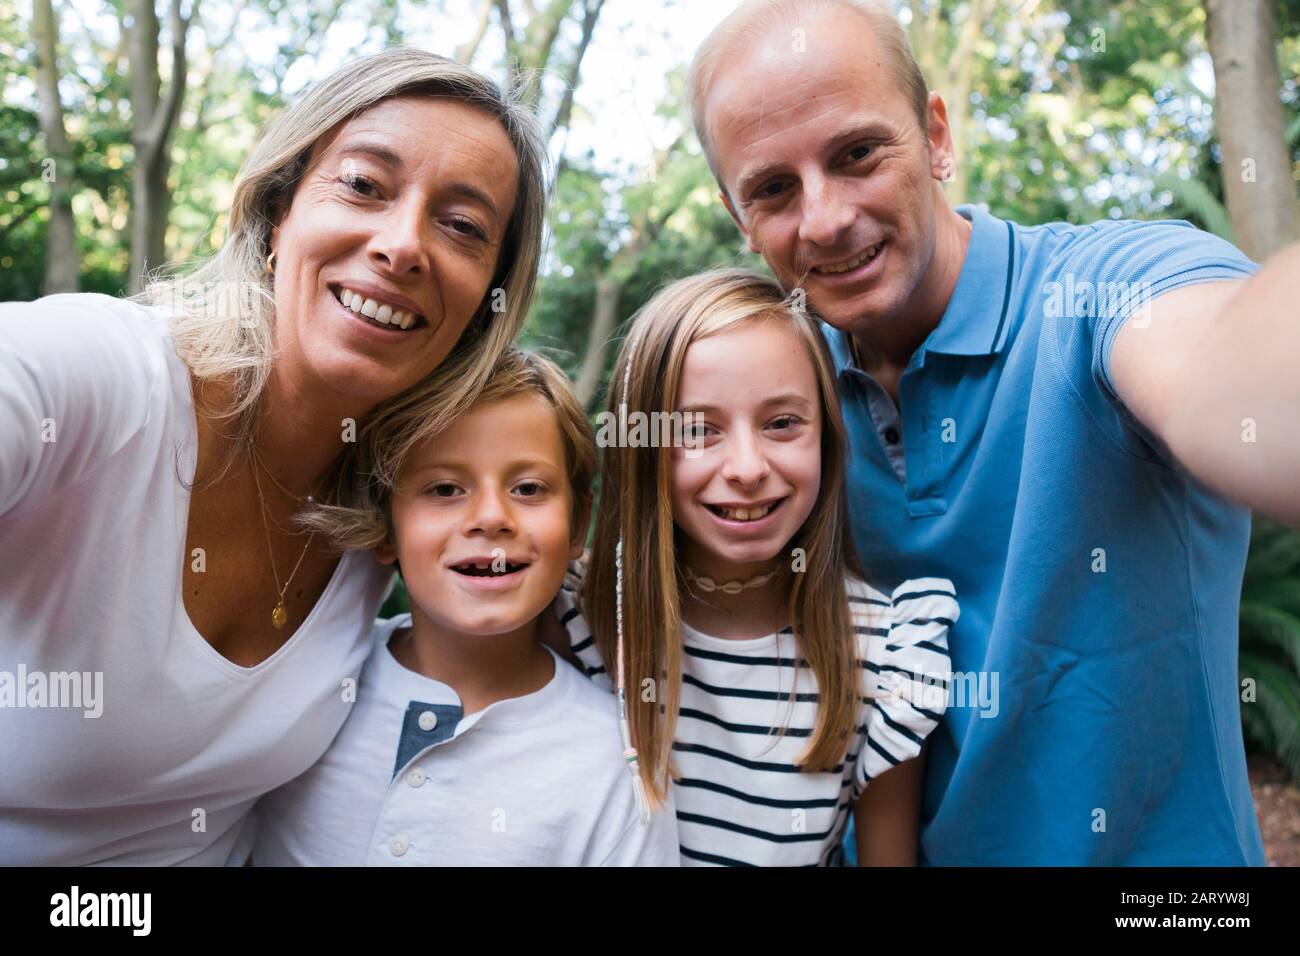 Family taking selfie by trees Stock Photo